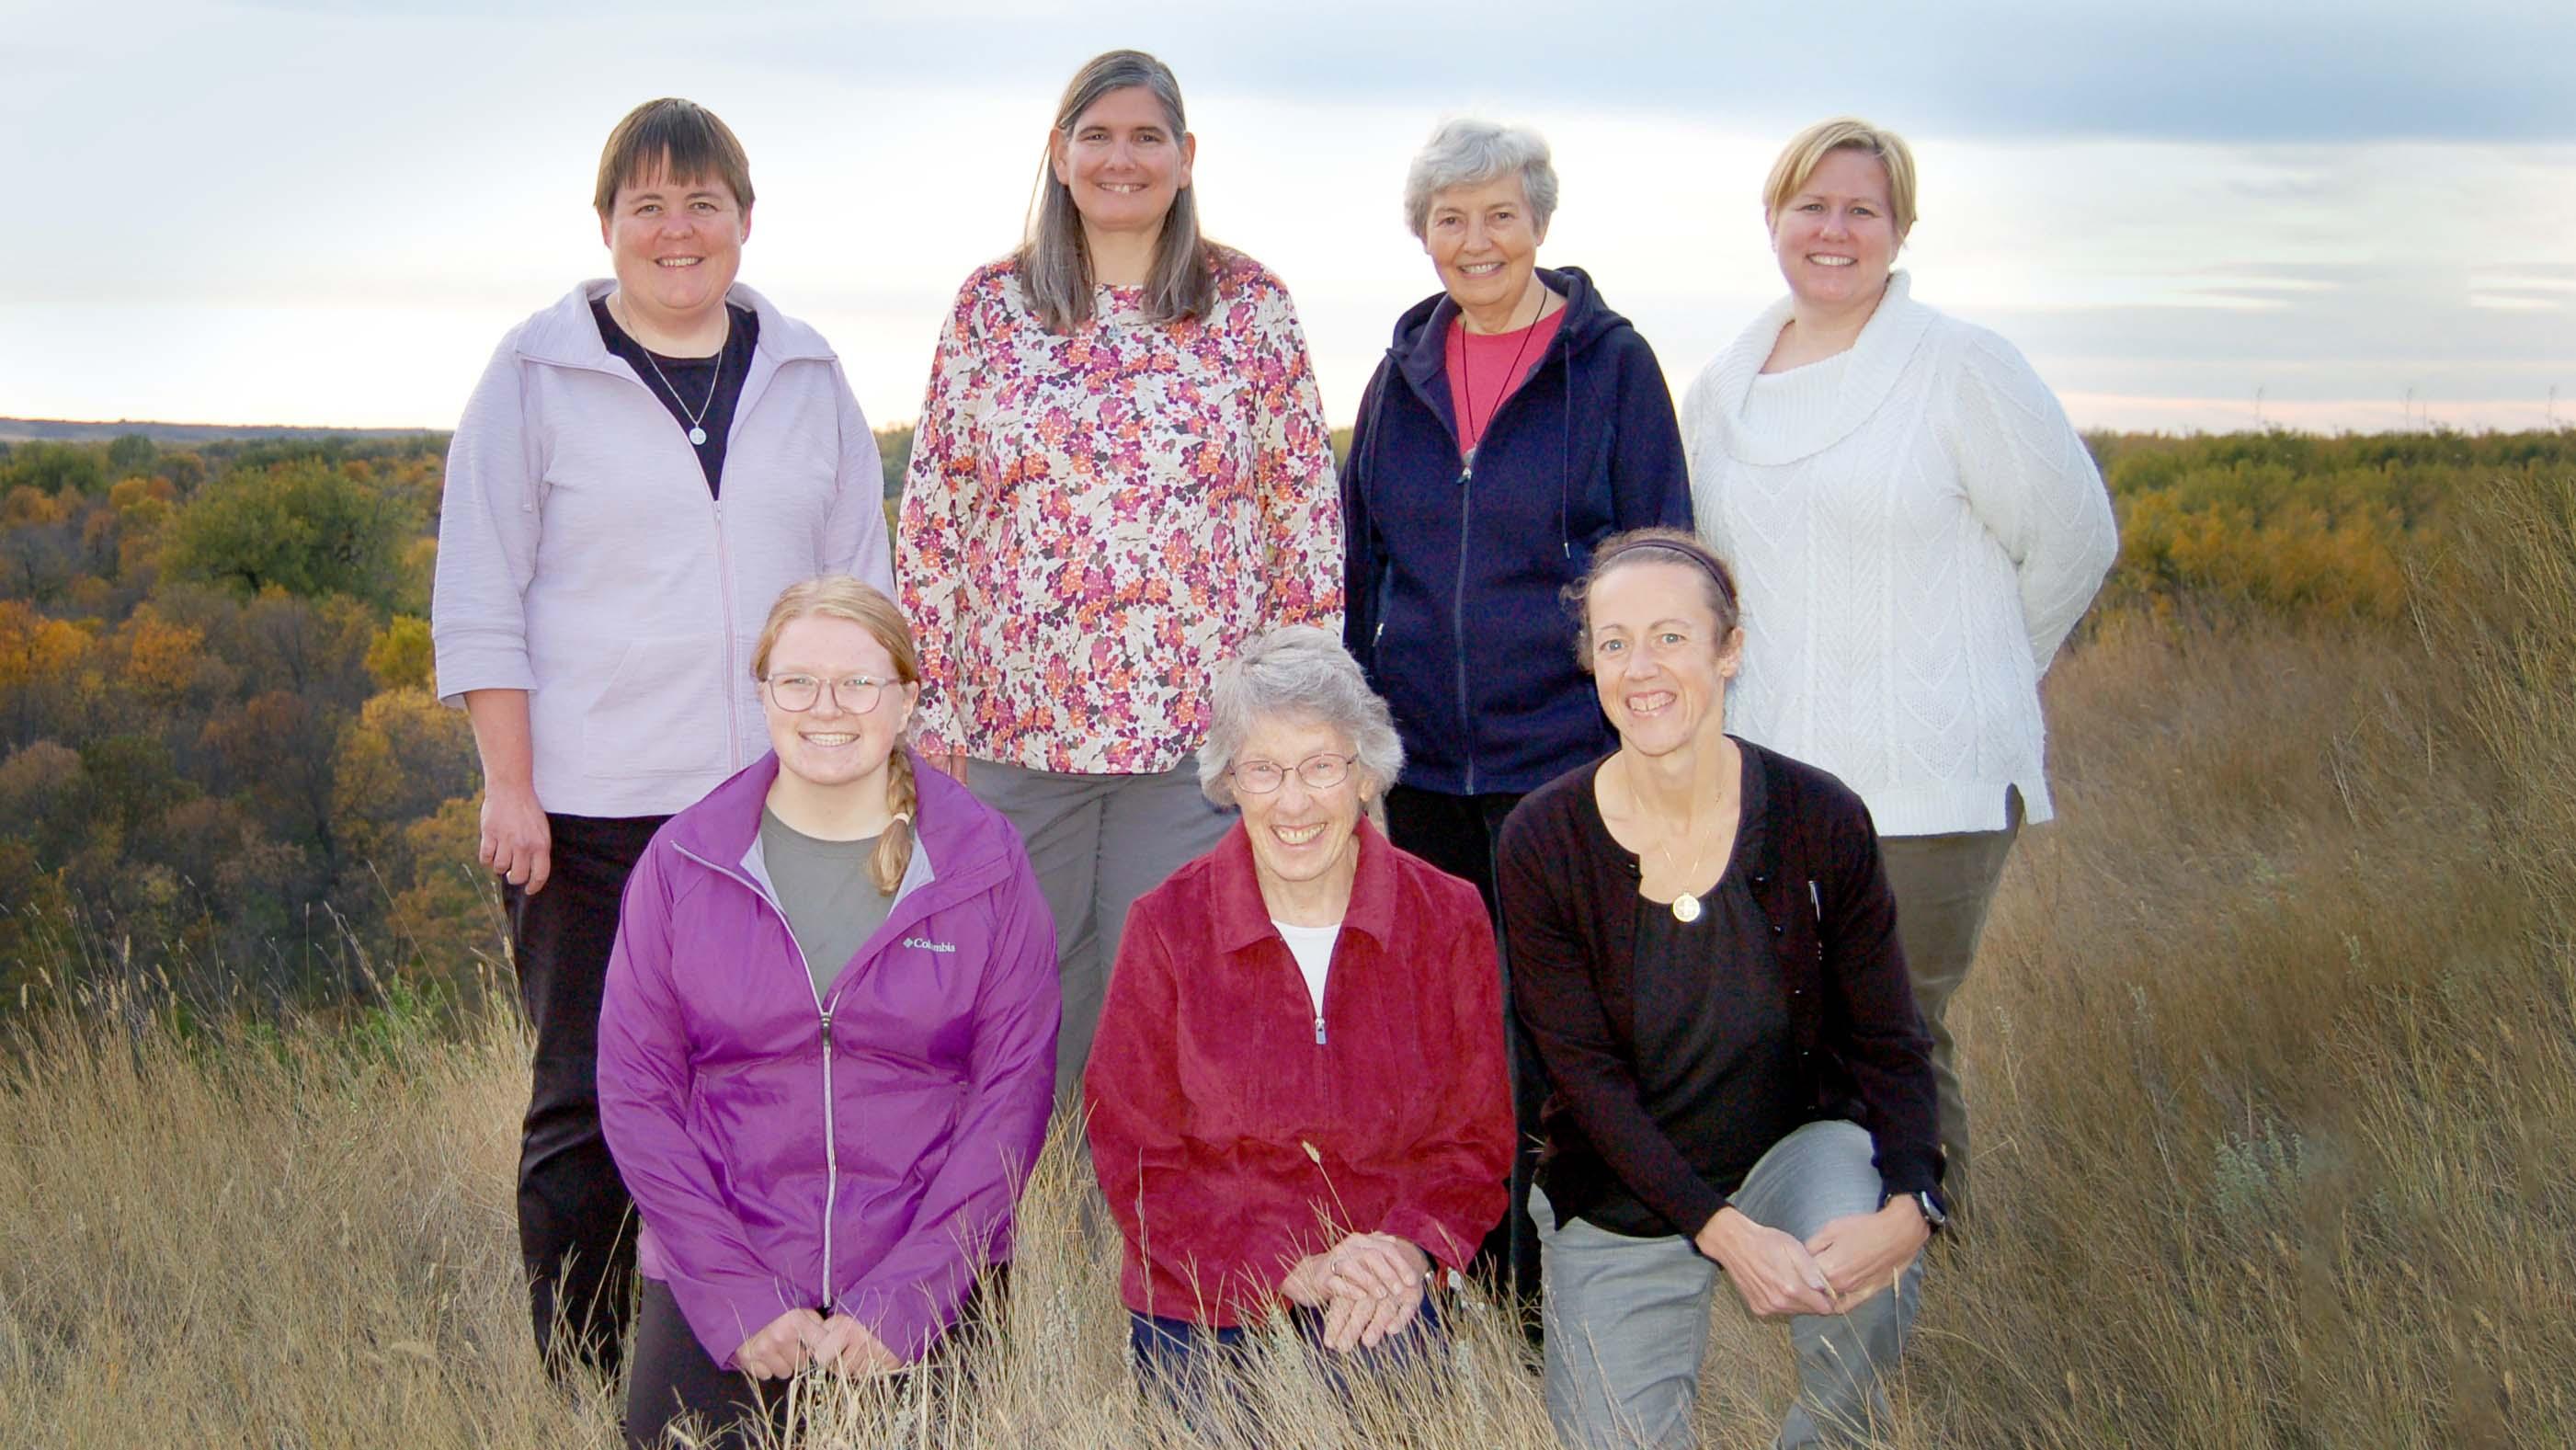 Seven Sisters of Annunciation Monastery posing for photo in the tall grass along the bluff outside the monastery with fall colored trees in the background.